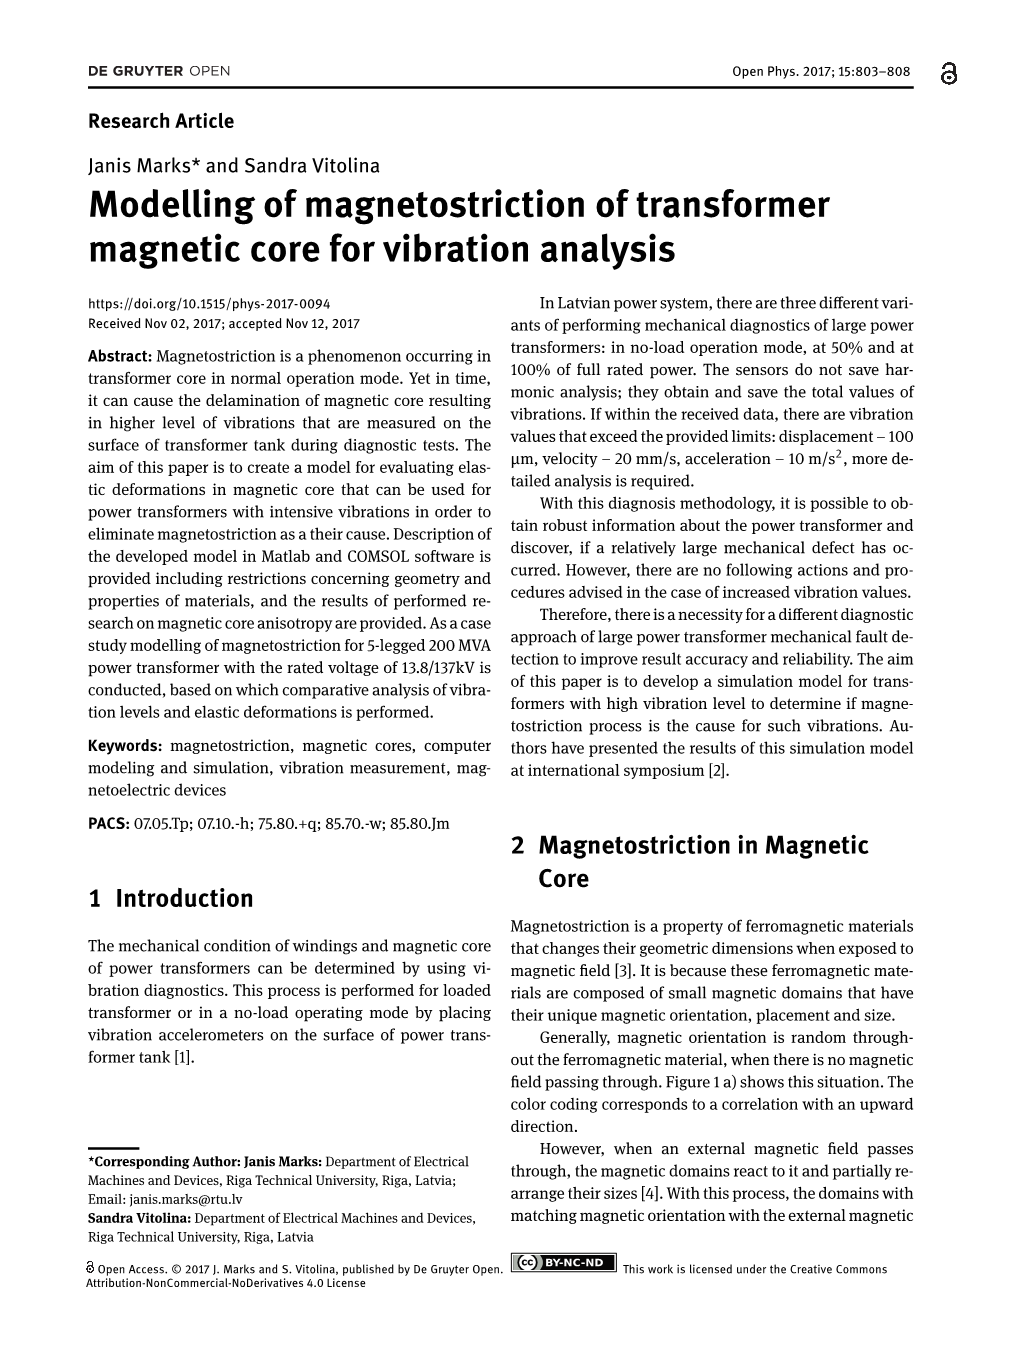 Modelling of Magnetostriction of Transformer Magnetic Core For